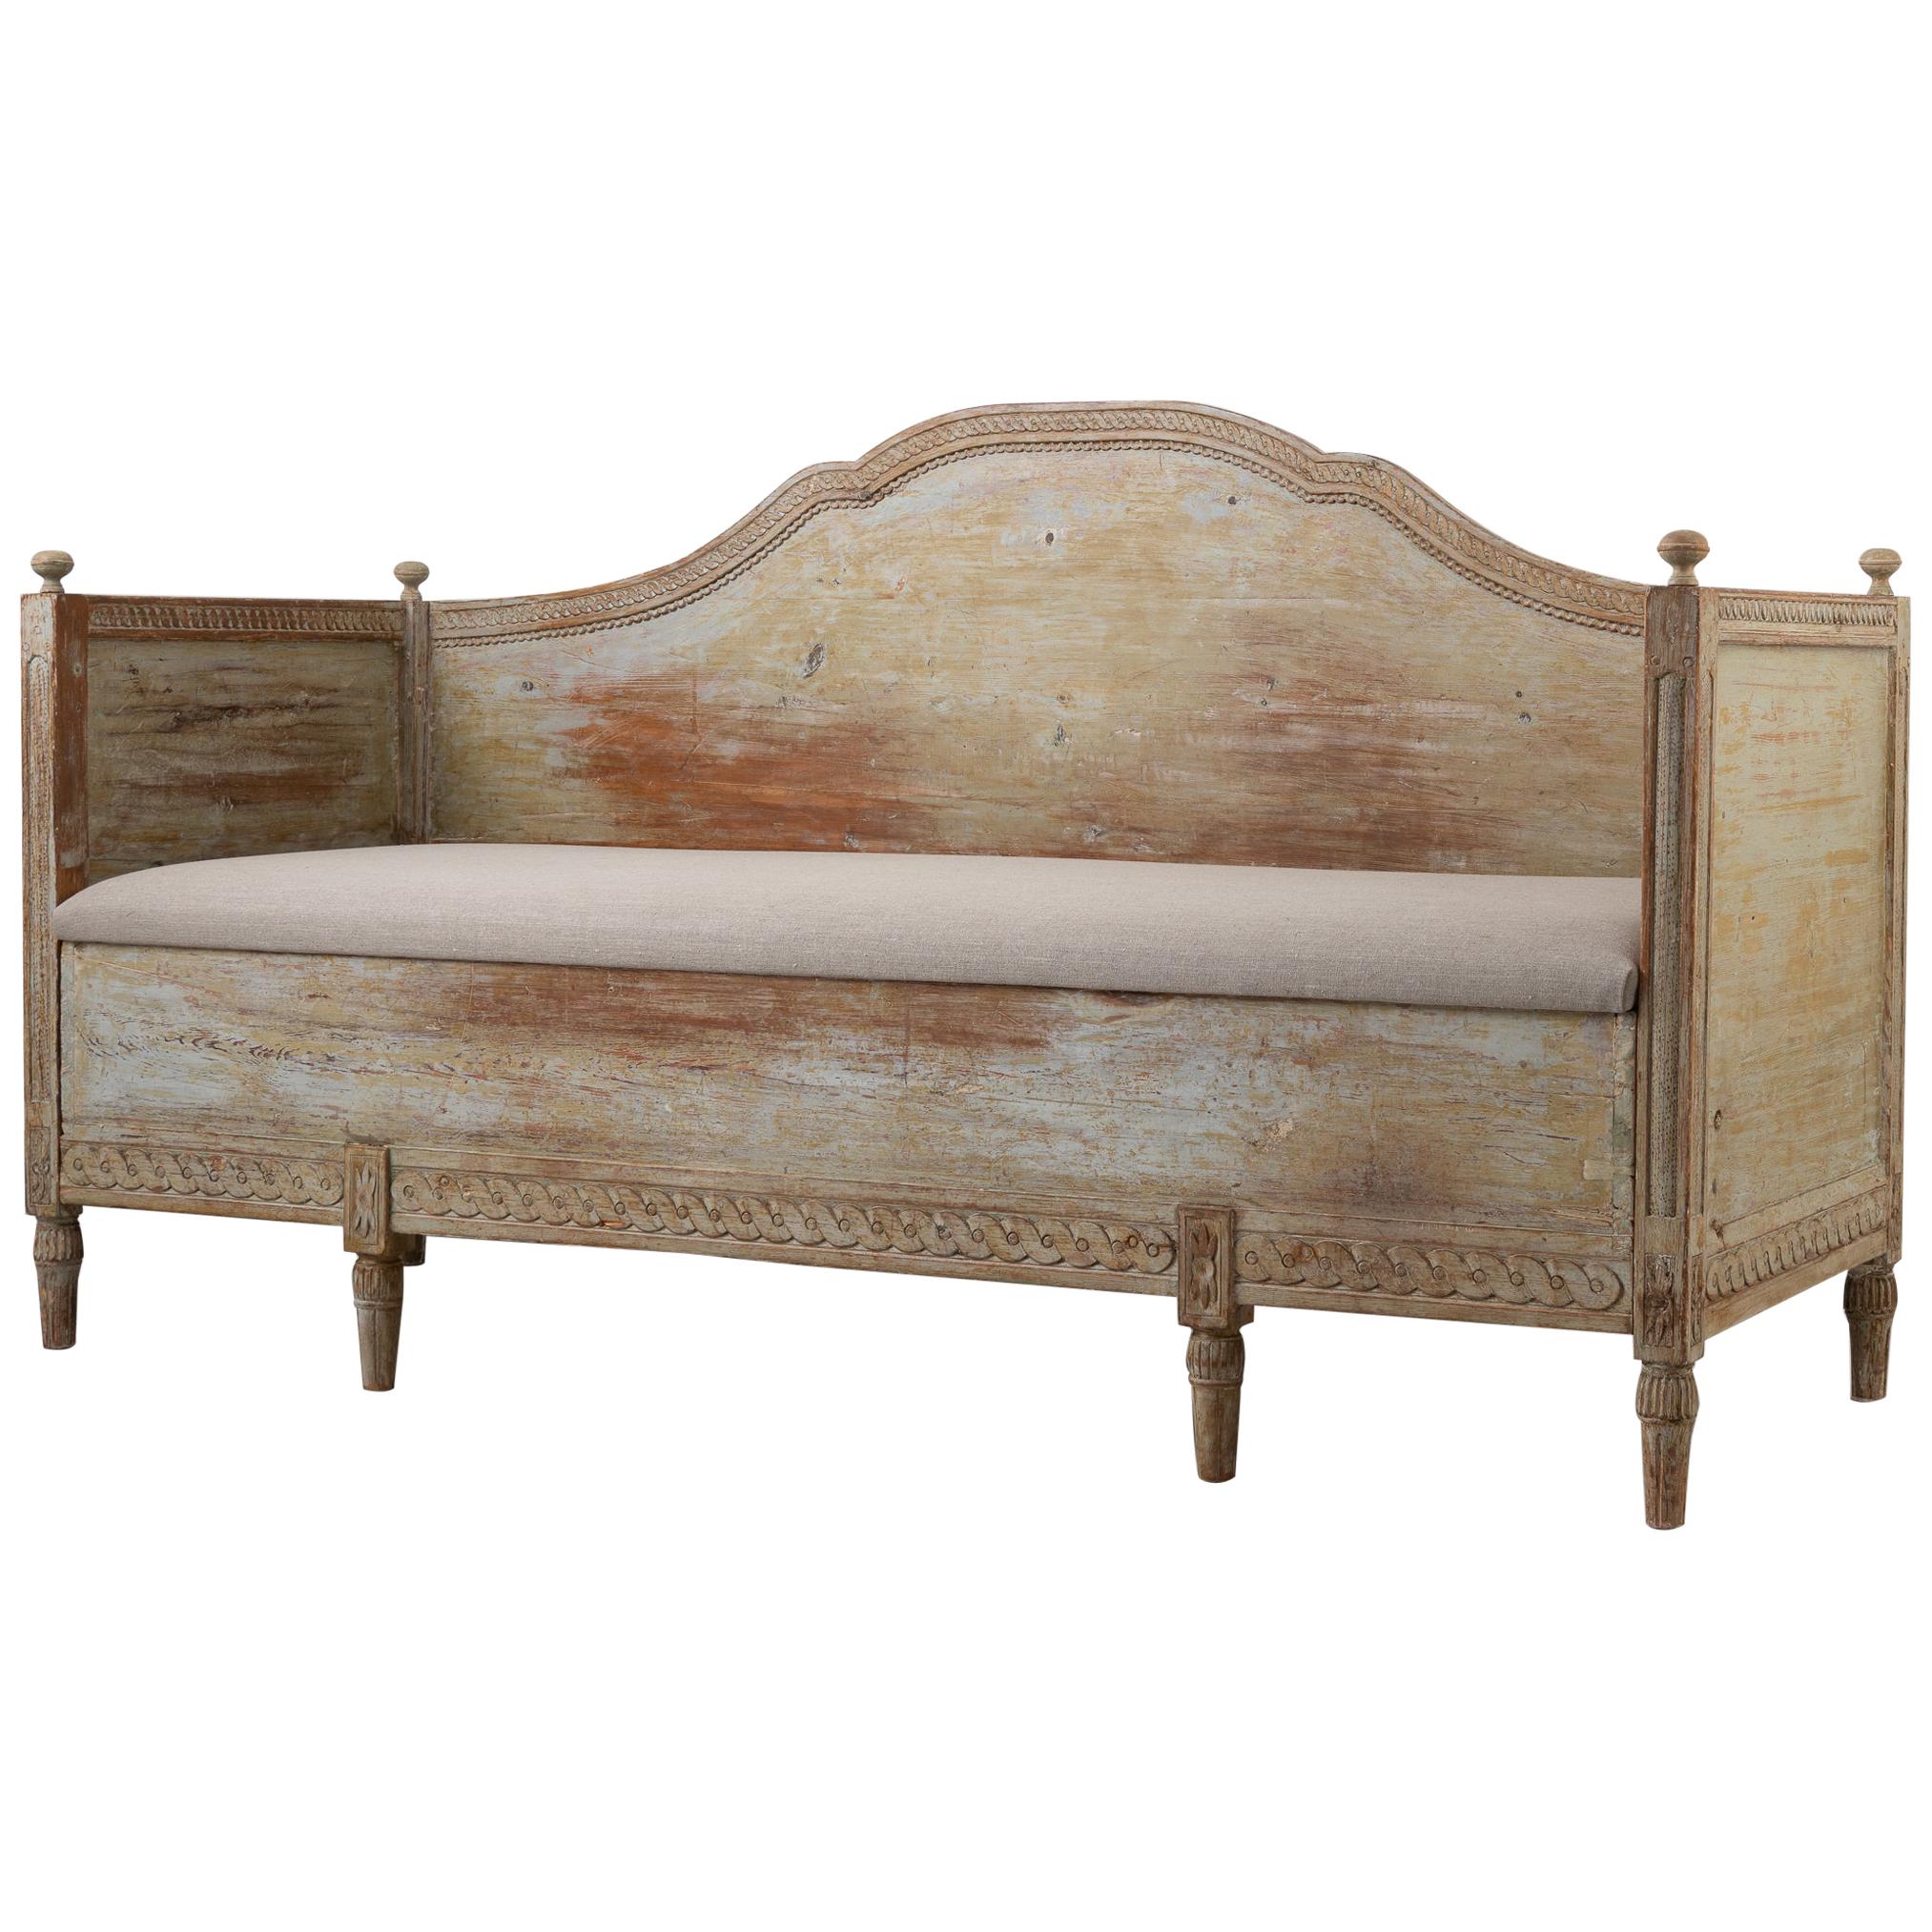 Antique Neoclassical Sofa from Northern Sweden